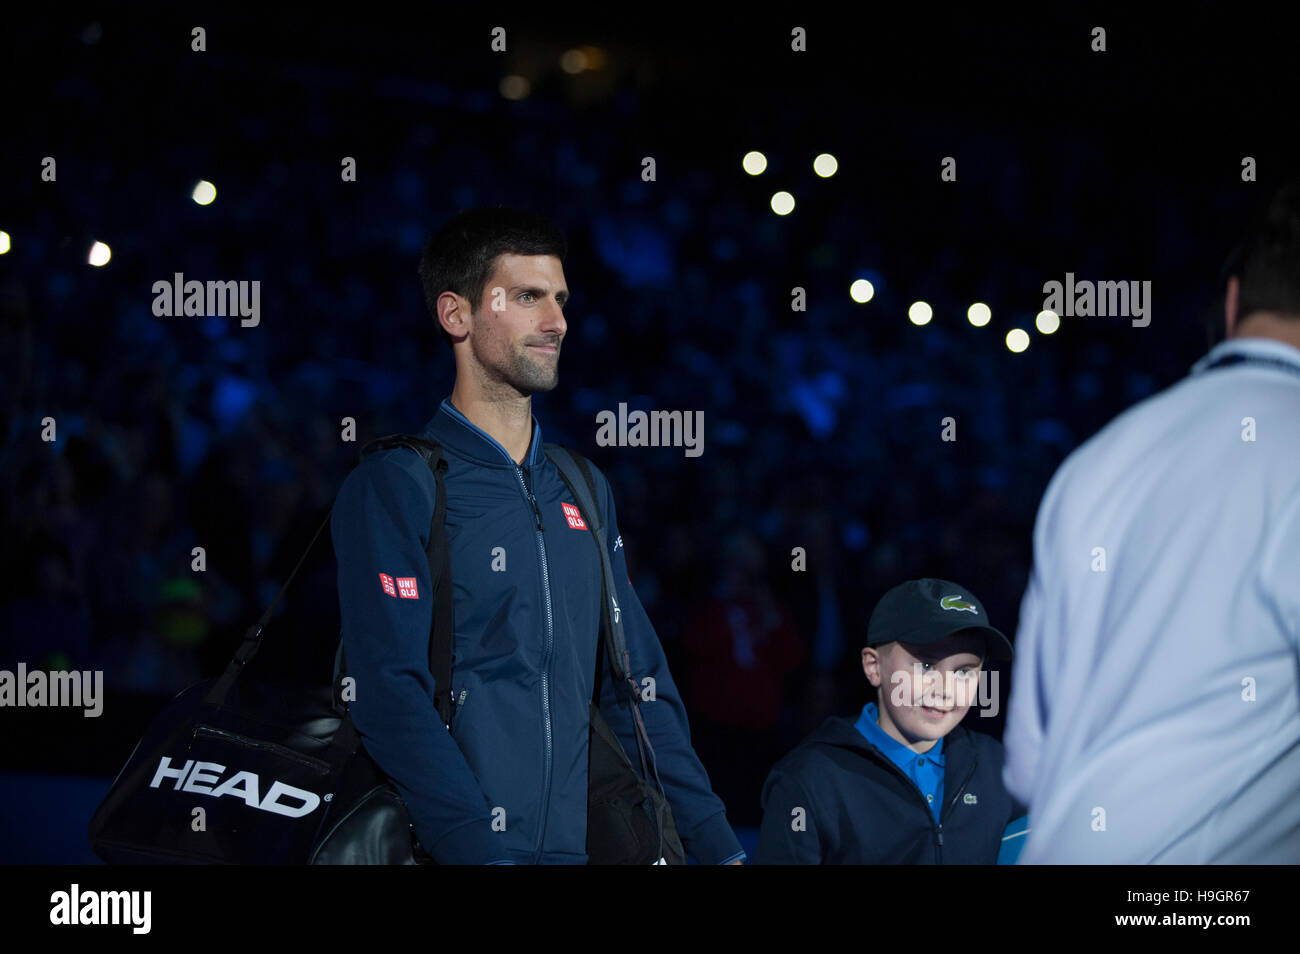 The O2, 20th Nov 2016. Novak Djokovic enters centre court for his Finals match with Murray. © sportsimages. Stock Photo